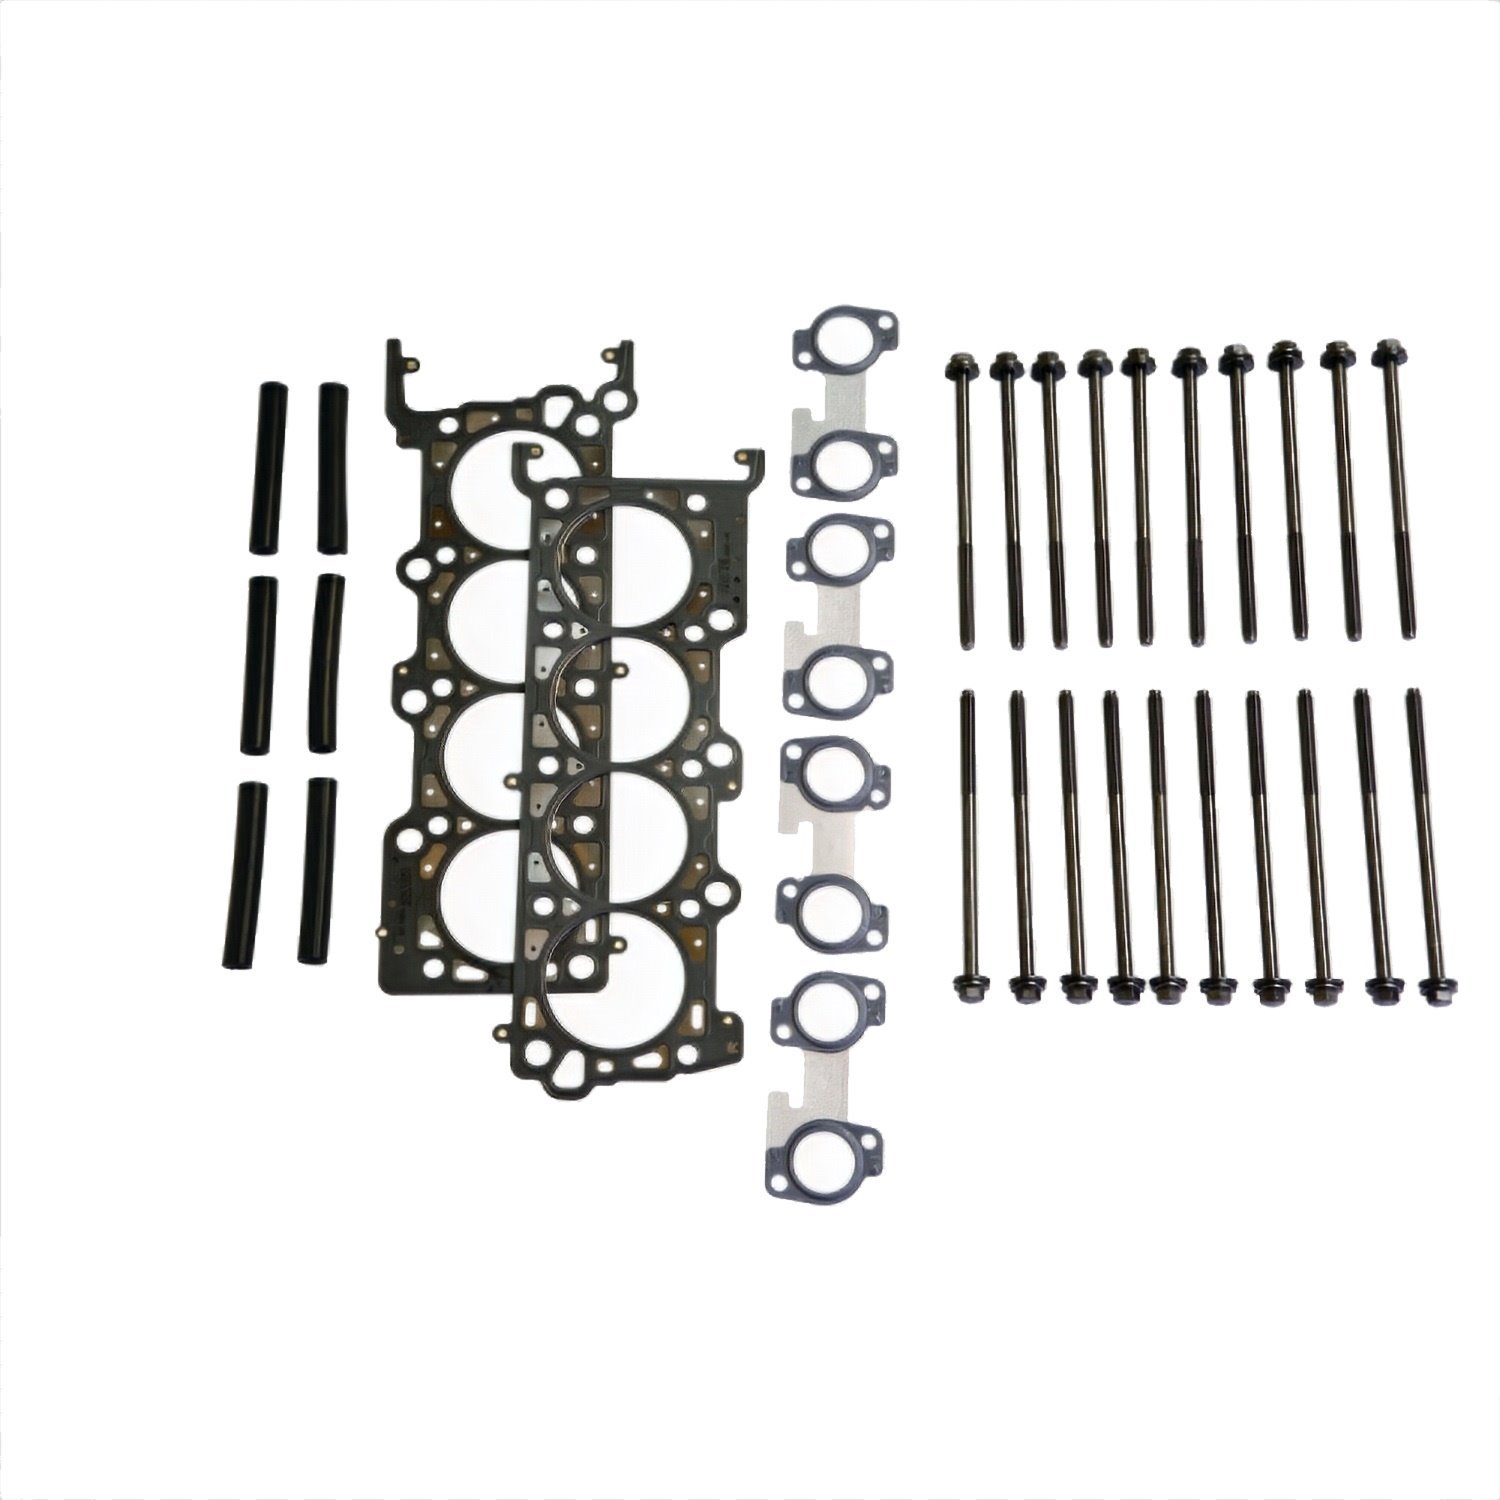 Cylinder Head Changing Kit 1996-04 Mustang 4.6L SOHC